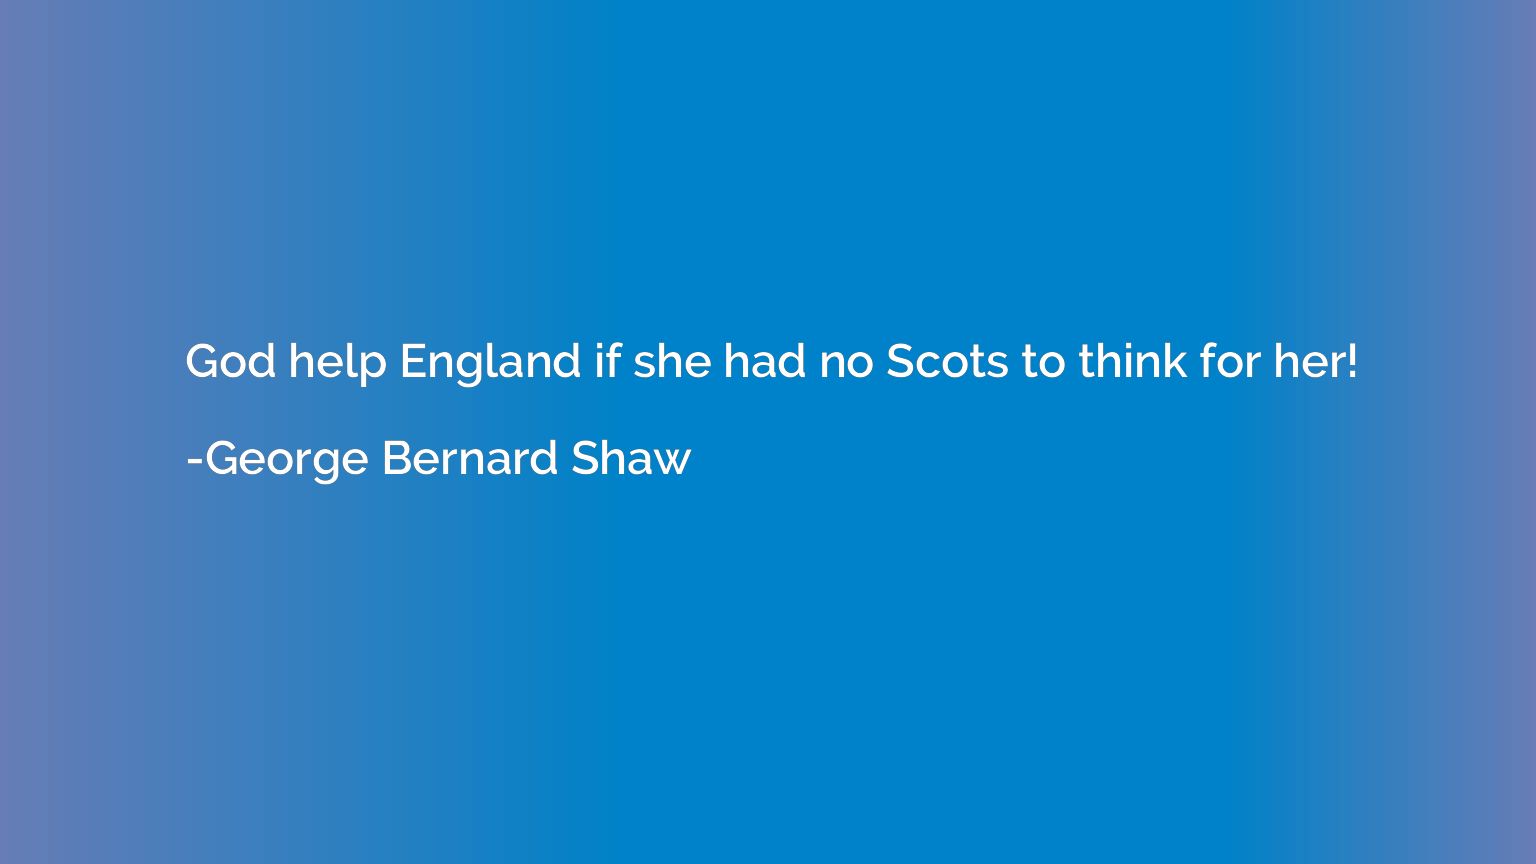 God help England if she had no Scots to think for her!